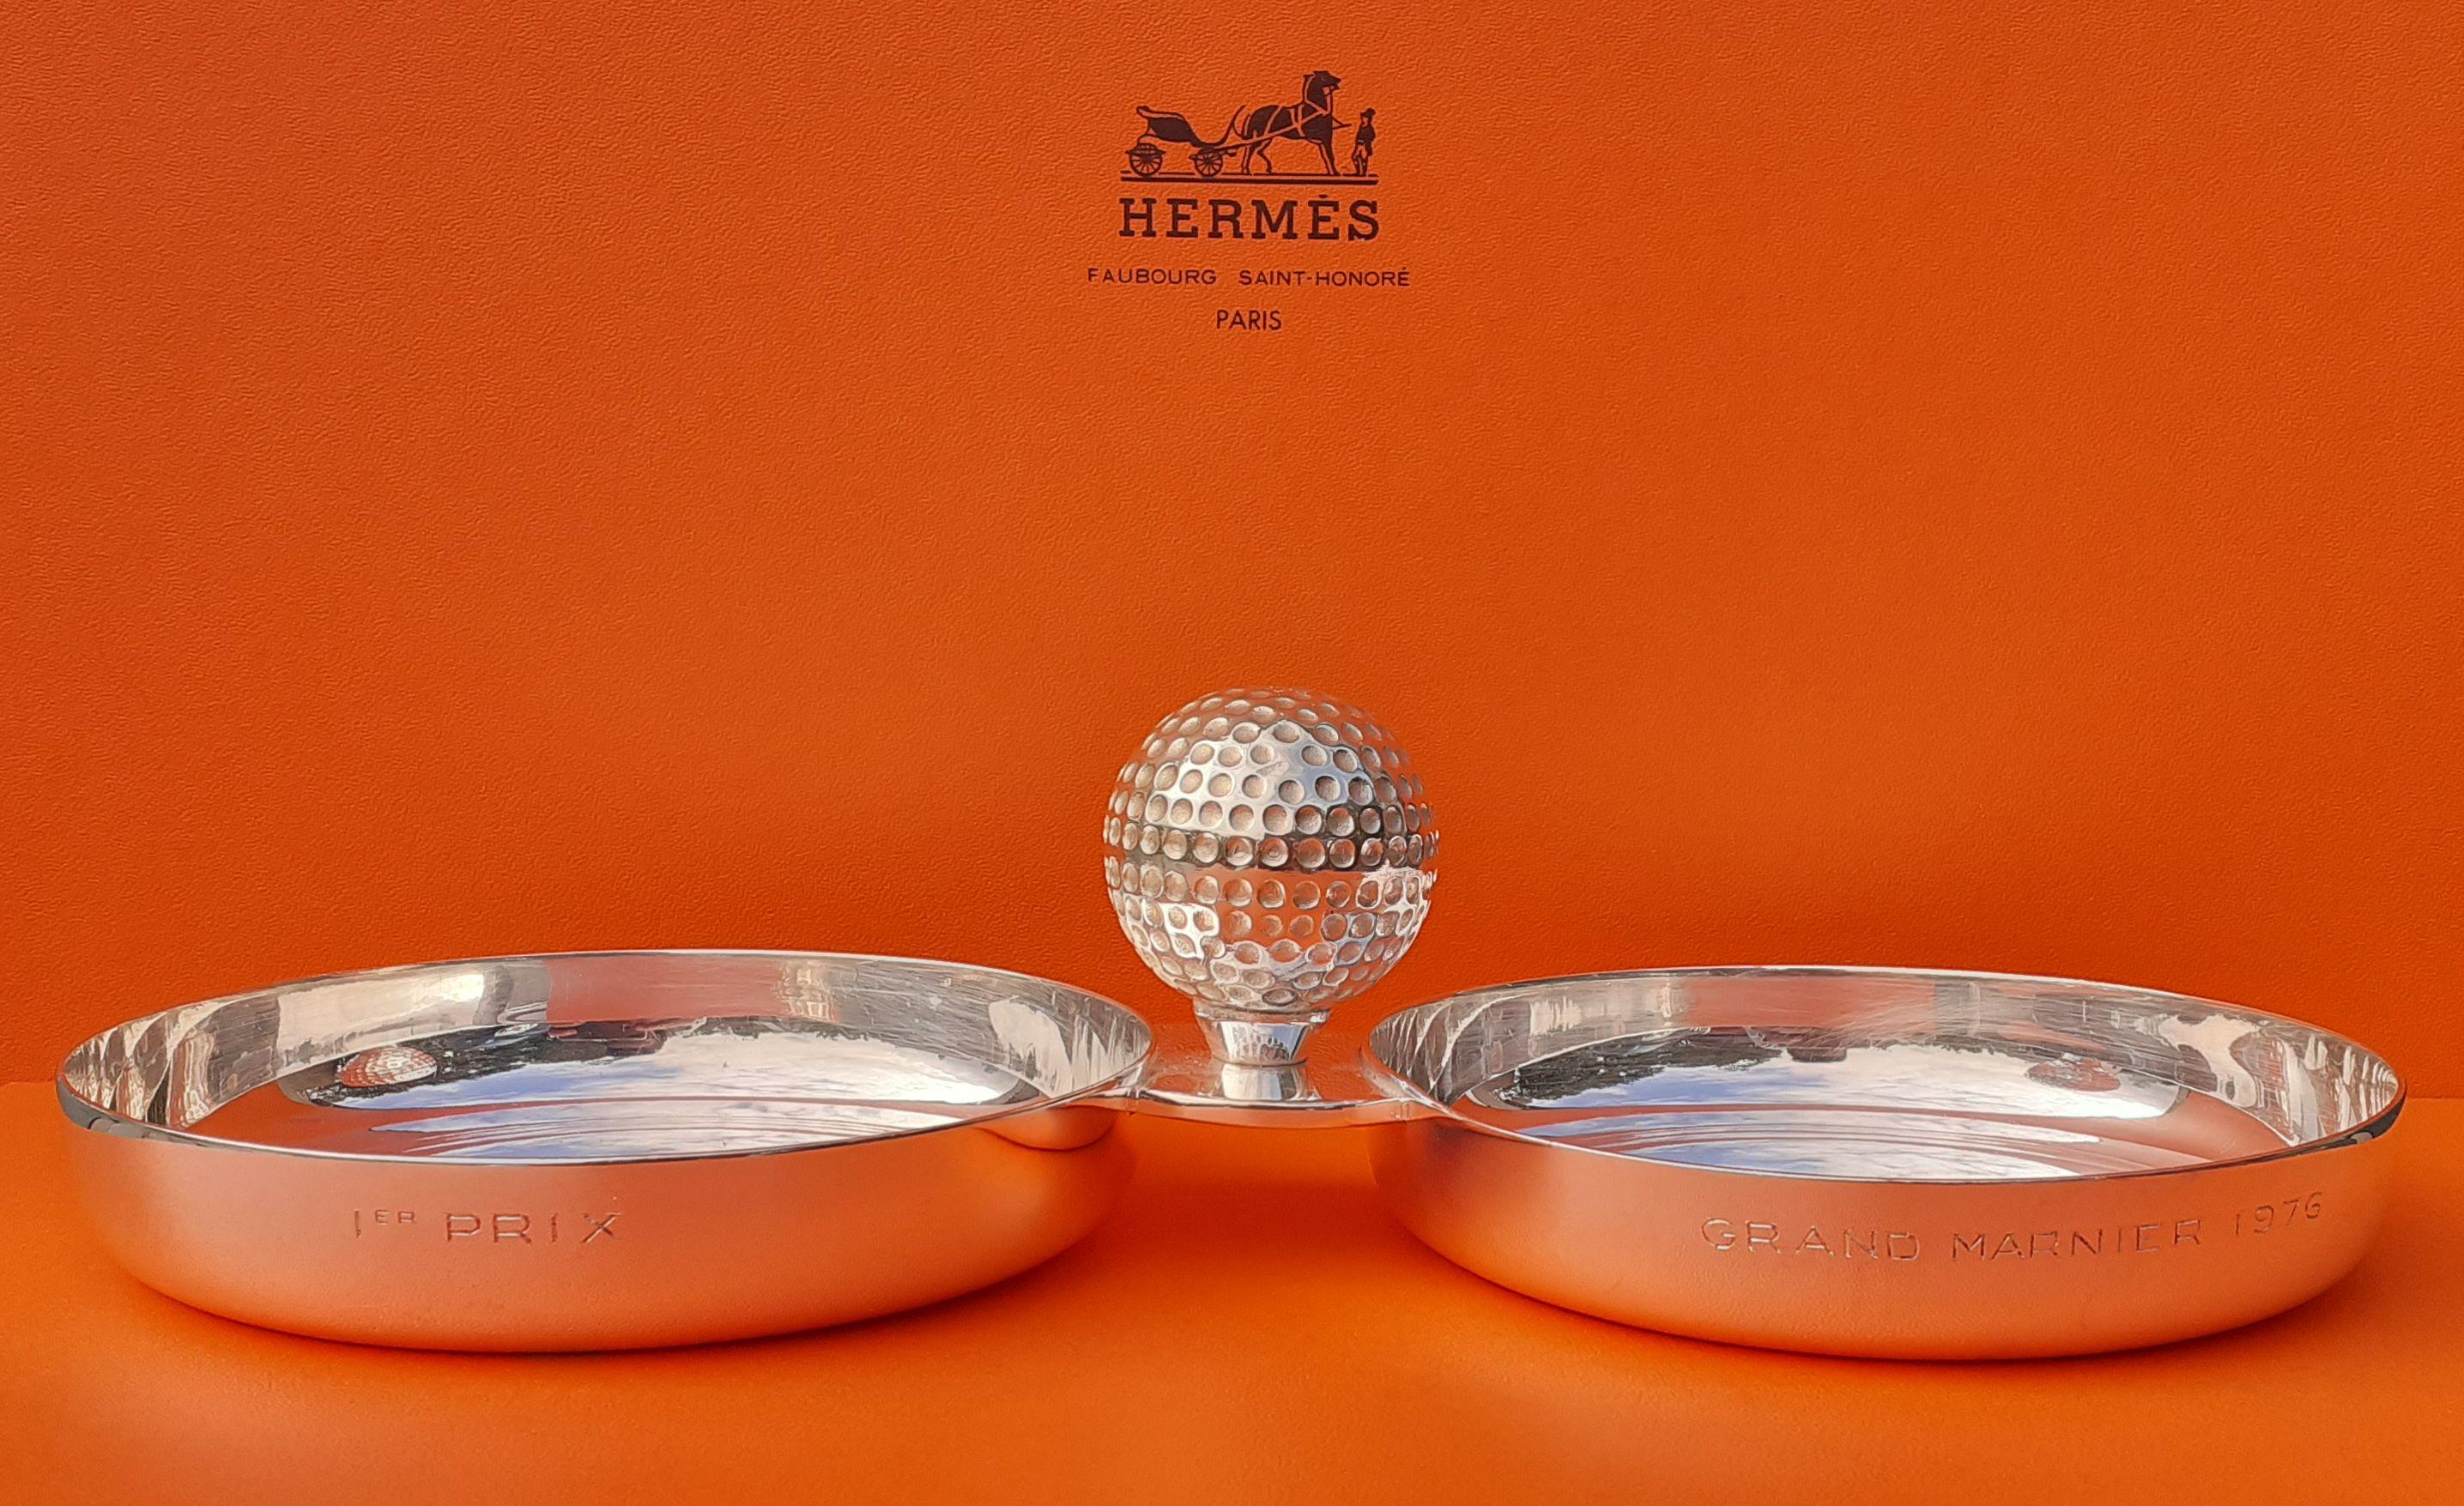 Exceptional Authentic Hermès Change Tray

Pattern: Golf

Made in France by Ravinet d'Enfert for Hermès

Vintage item, from the 70's

Made of silver-tone metal

